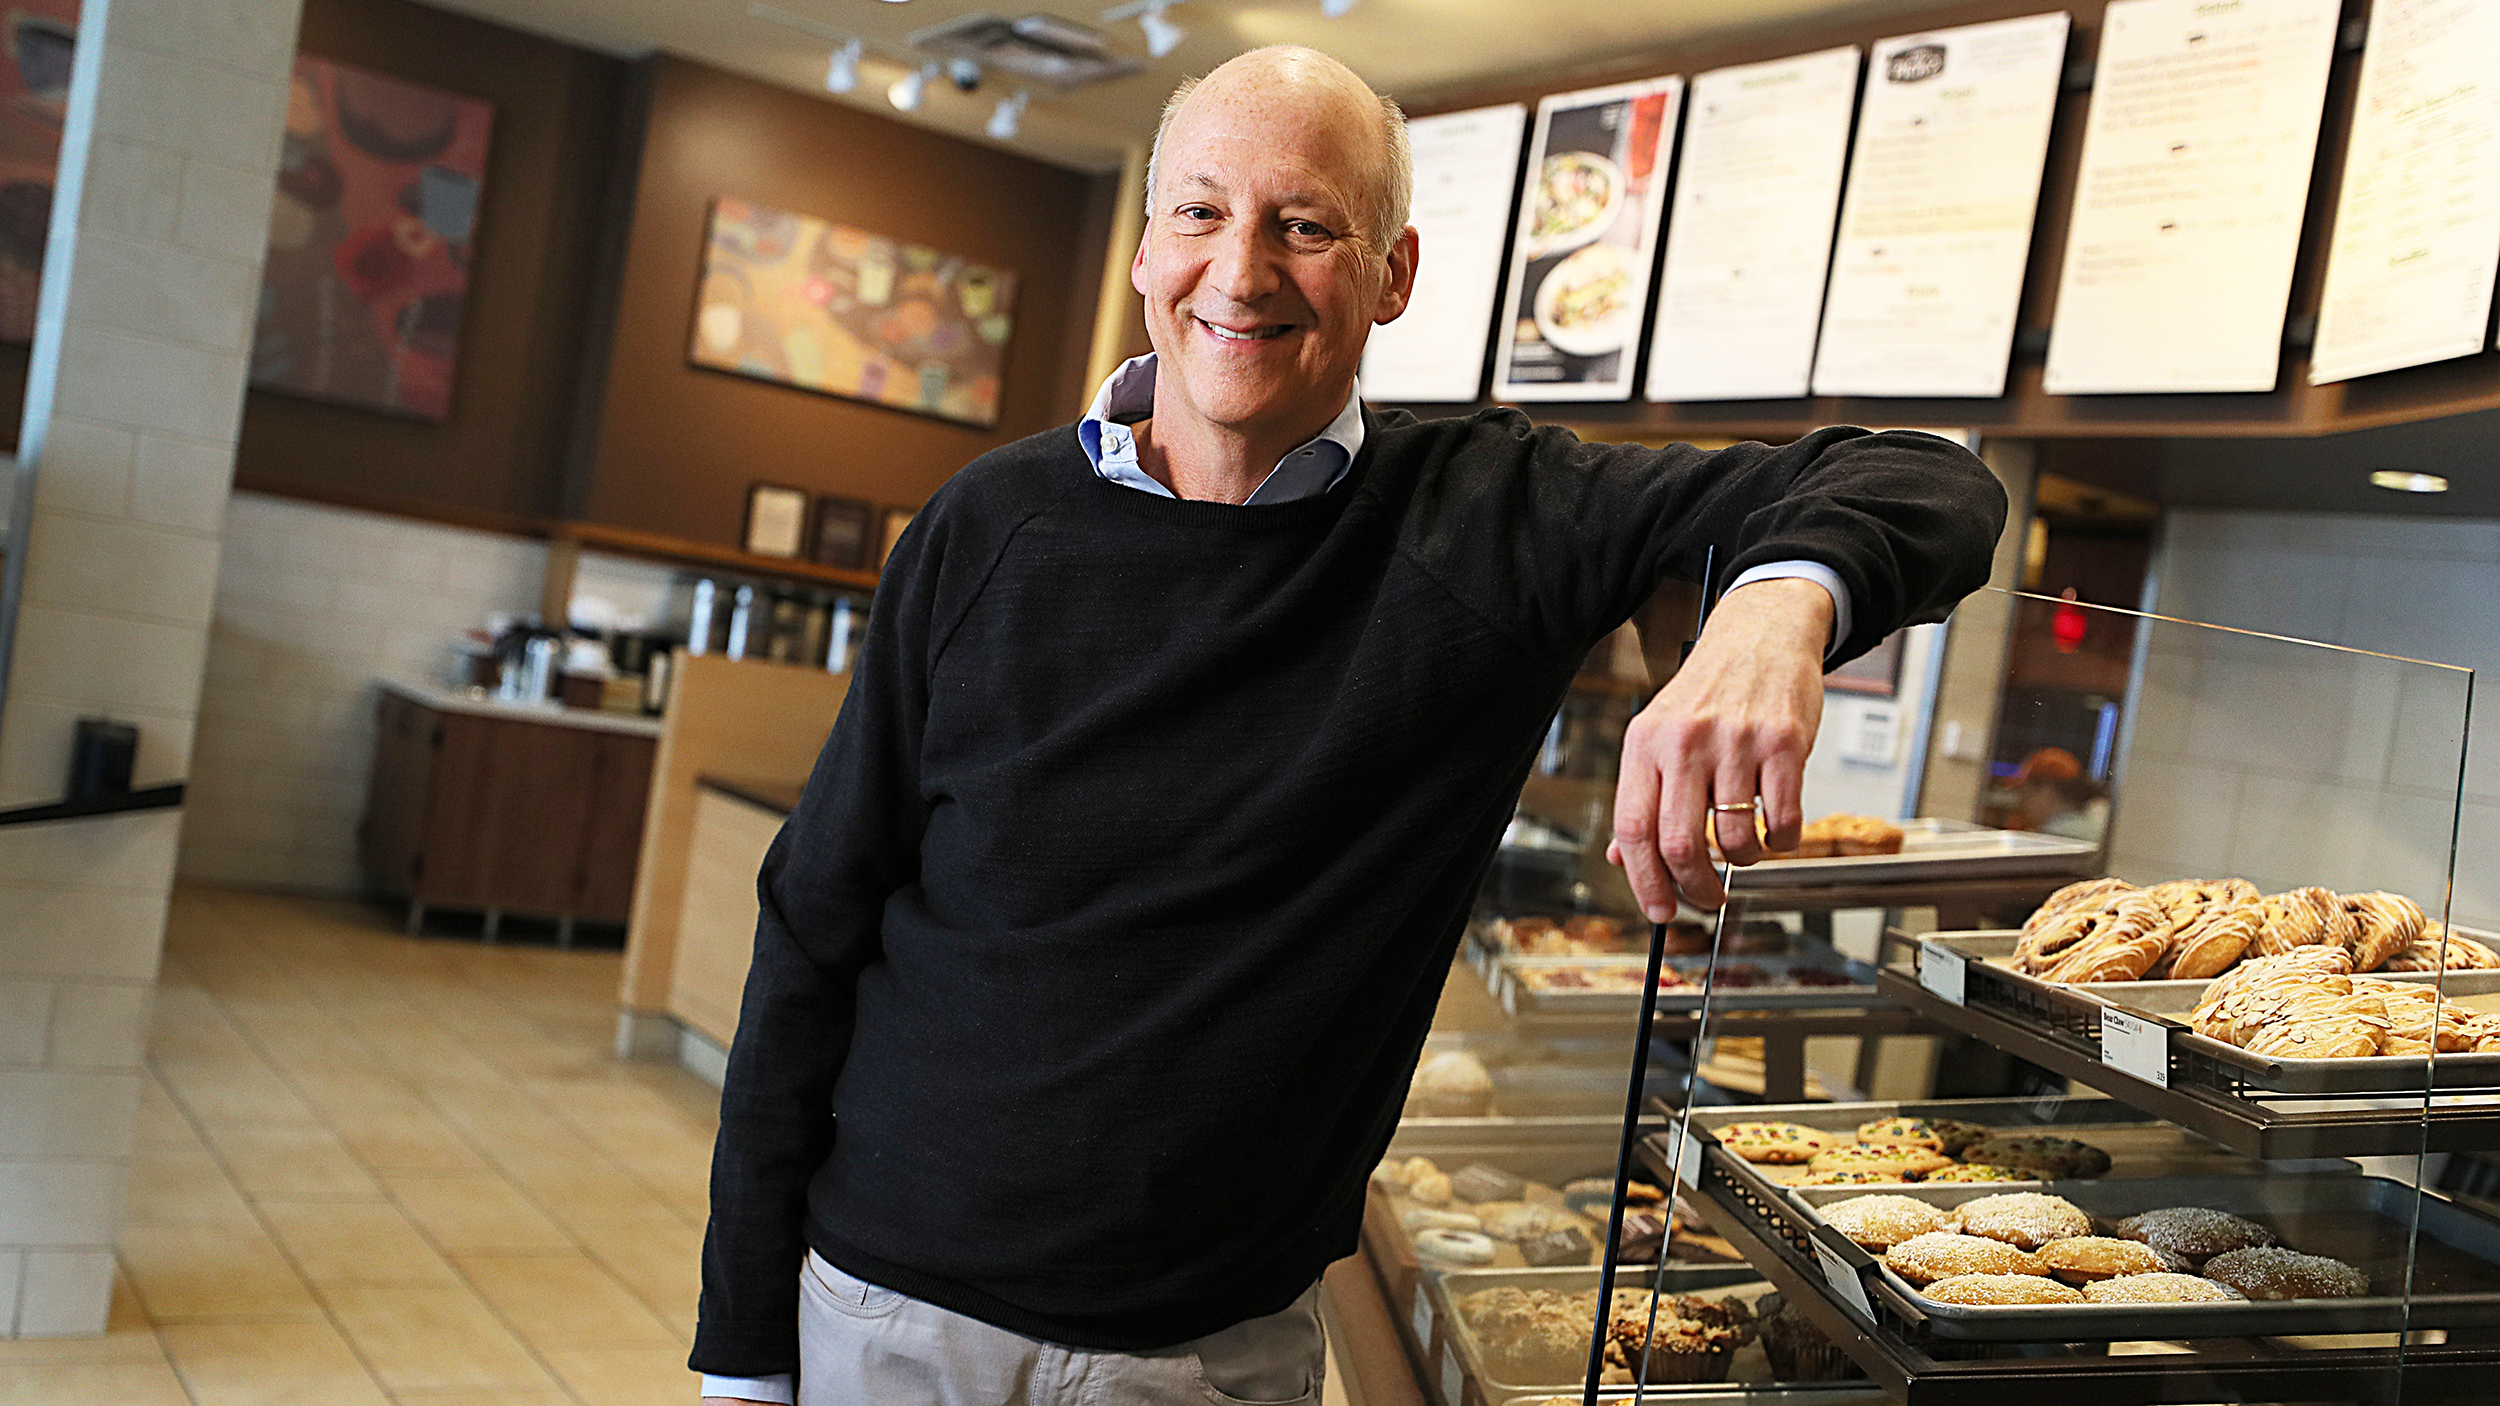 A man standing in front of a display of pastries at Panera Bread.